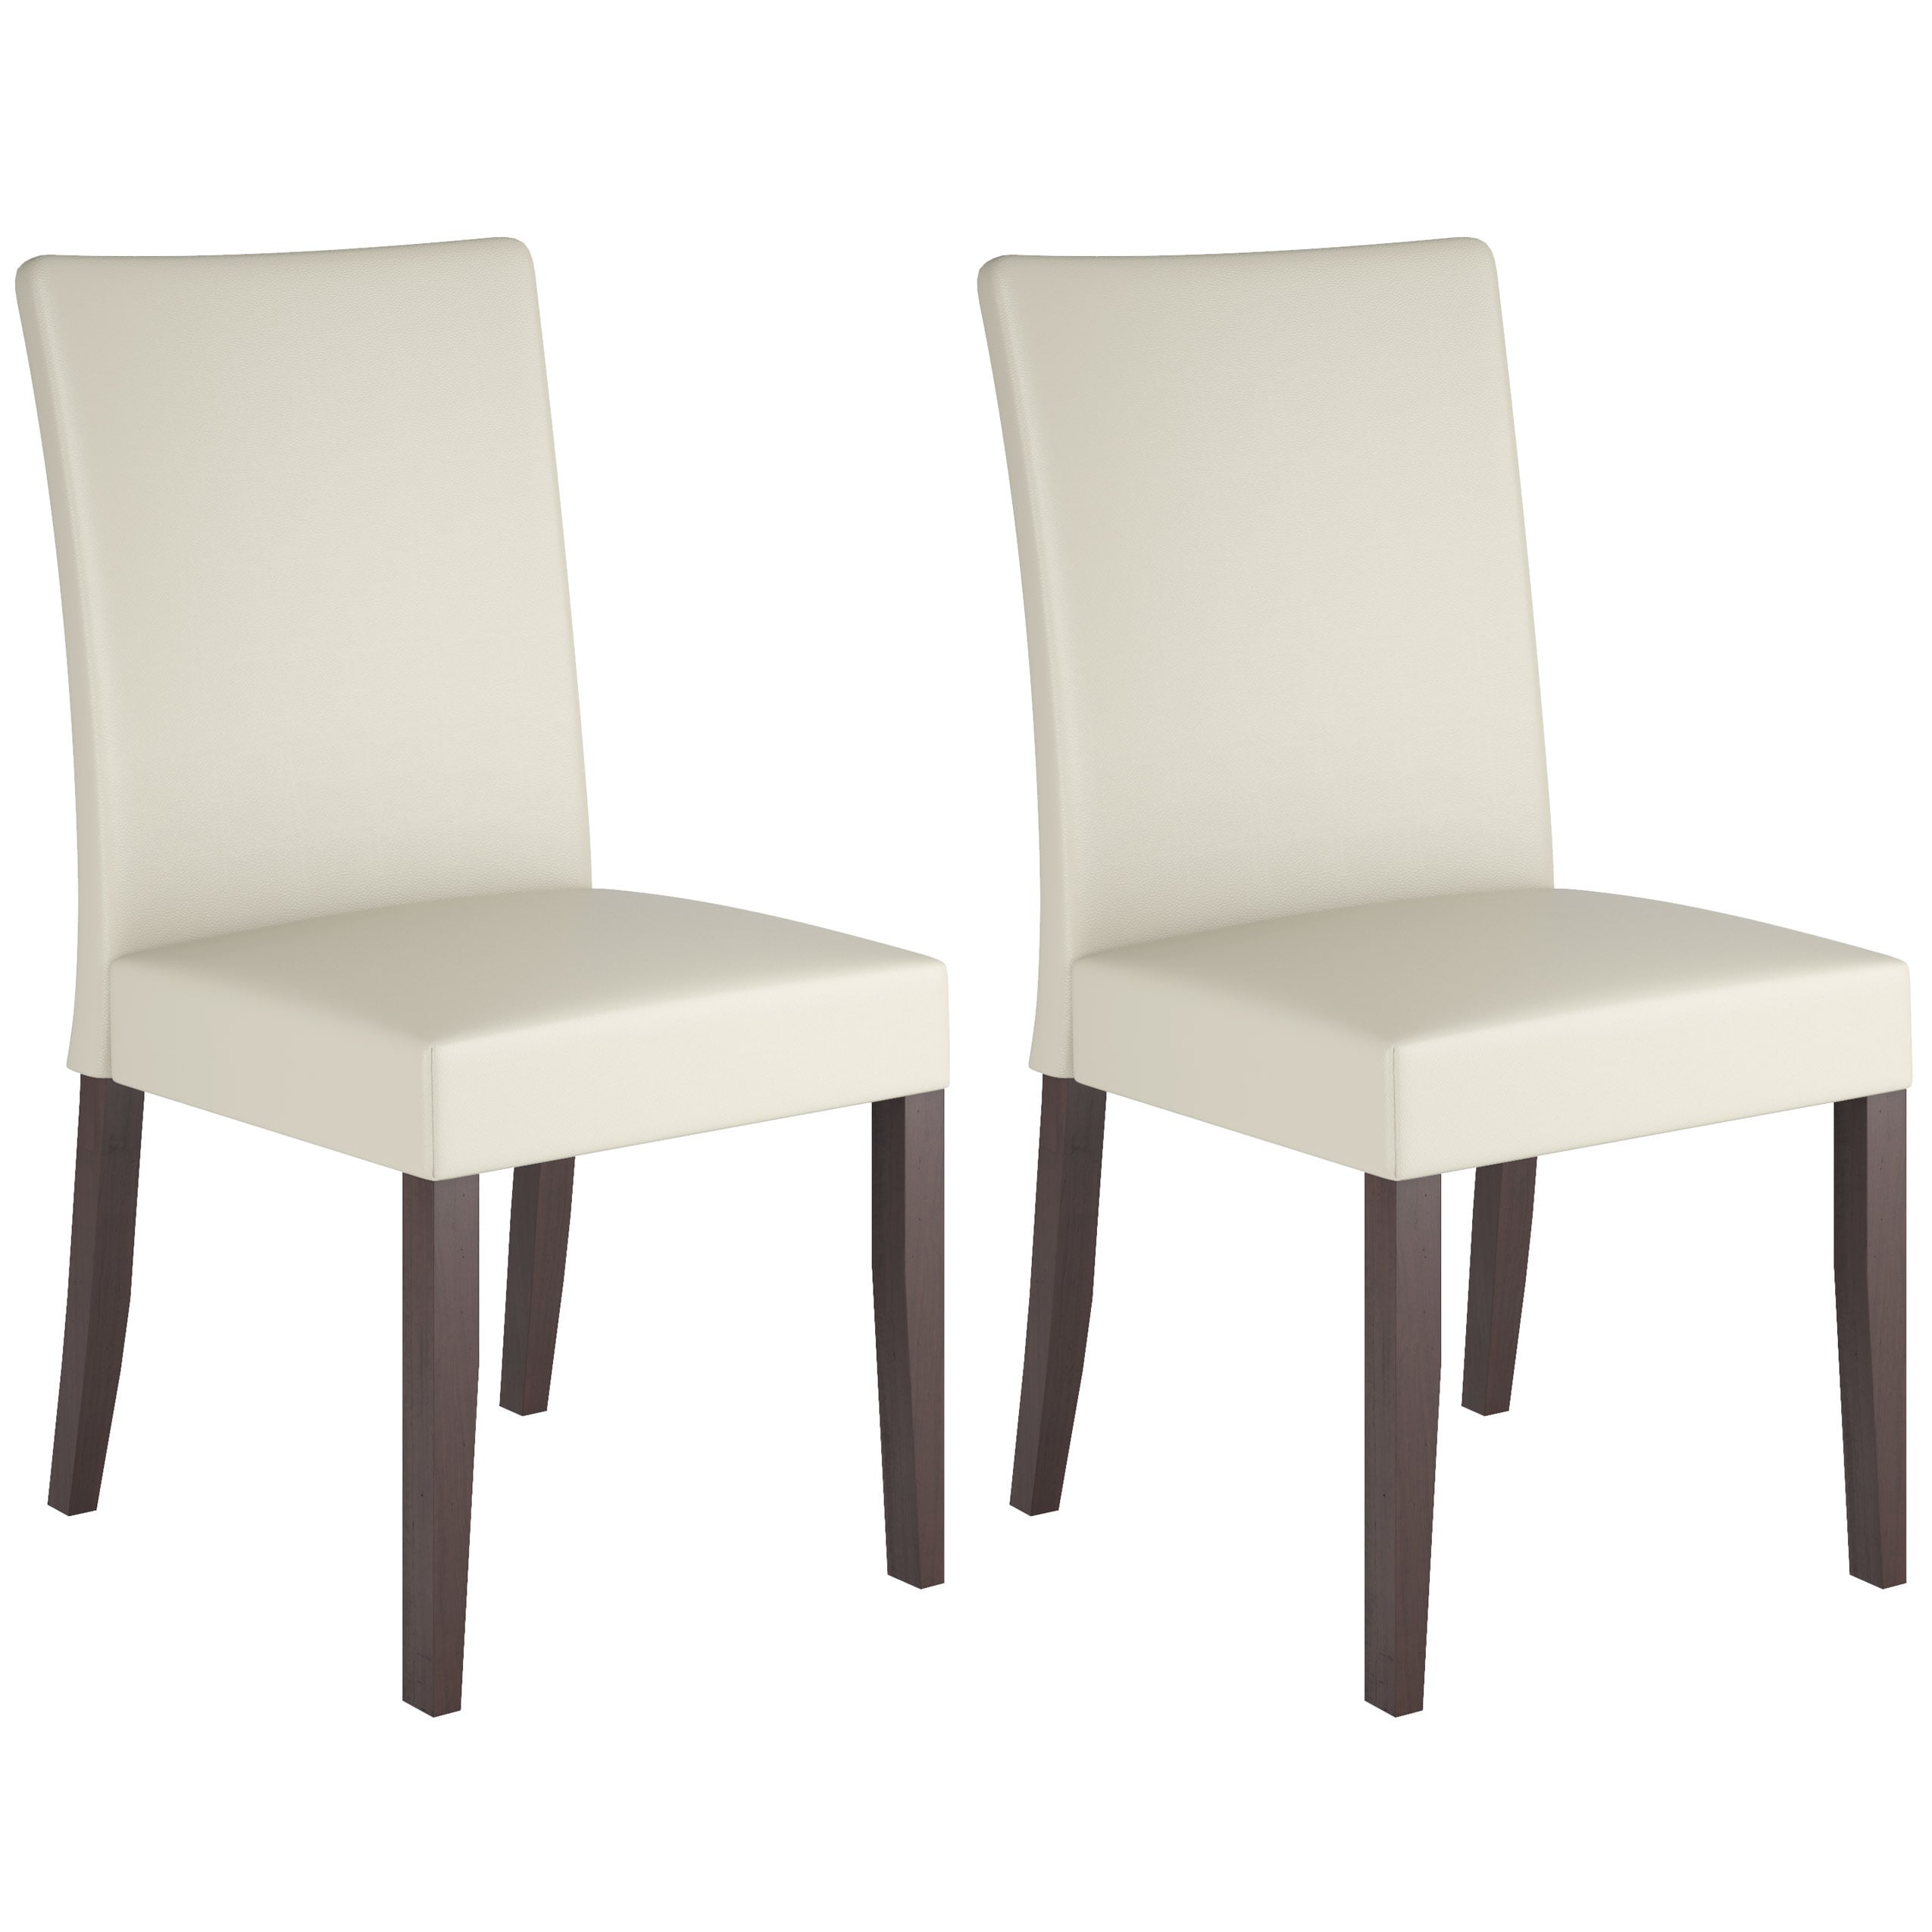 Corliving Atwood Cream Leatherette Dining Chairs (set Of 2)